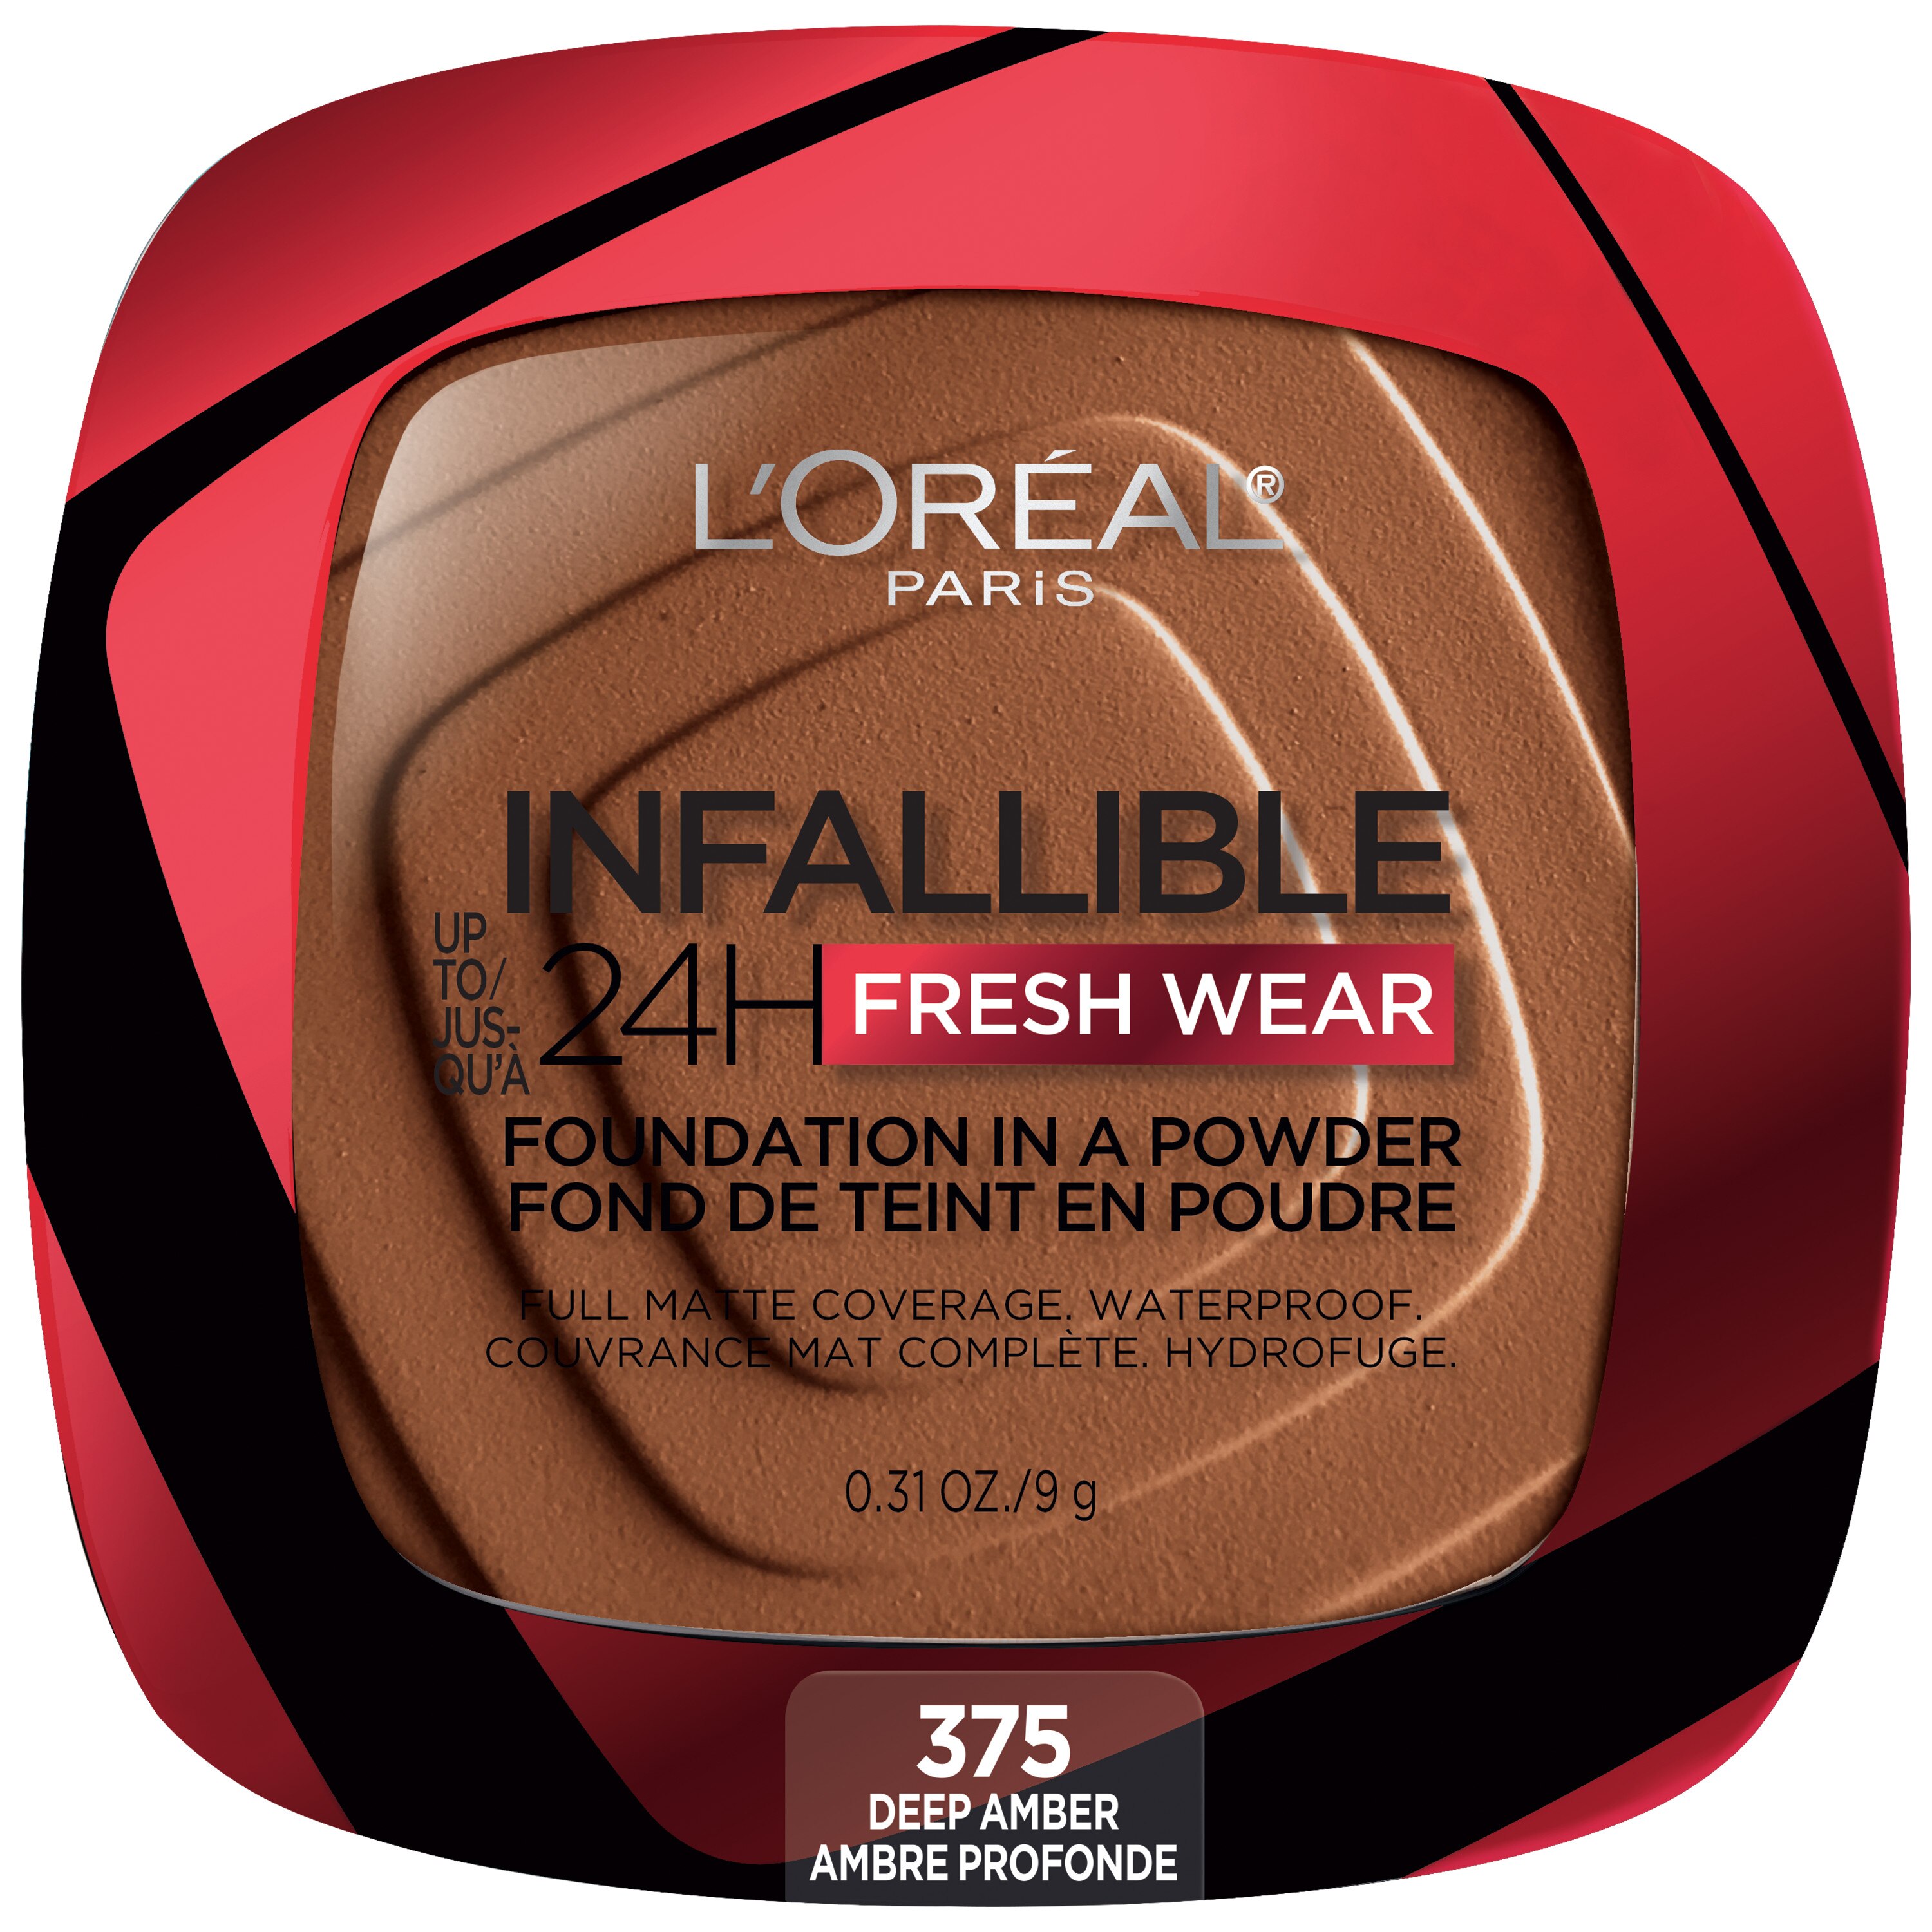 L'Oreal Paris Infallible Up To 24H Fresh Wear Foundation In A Powder, Deep Amber, 0.31 Oz , CVS